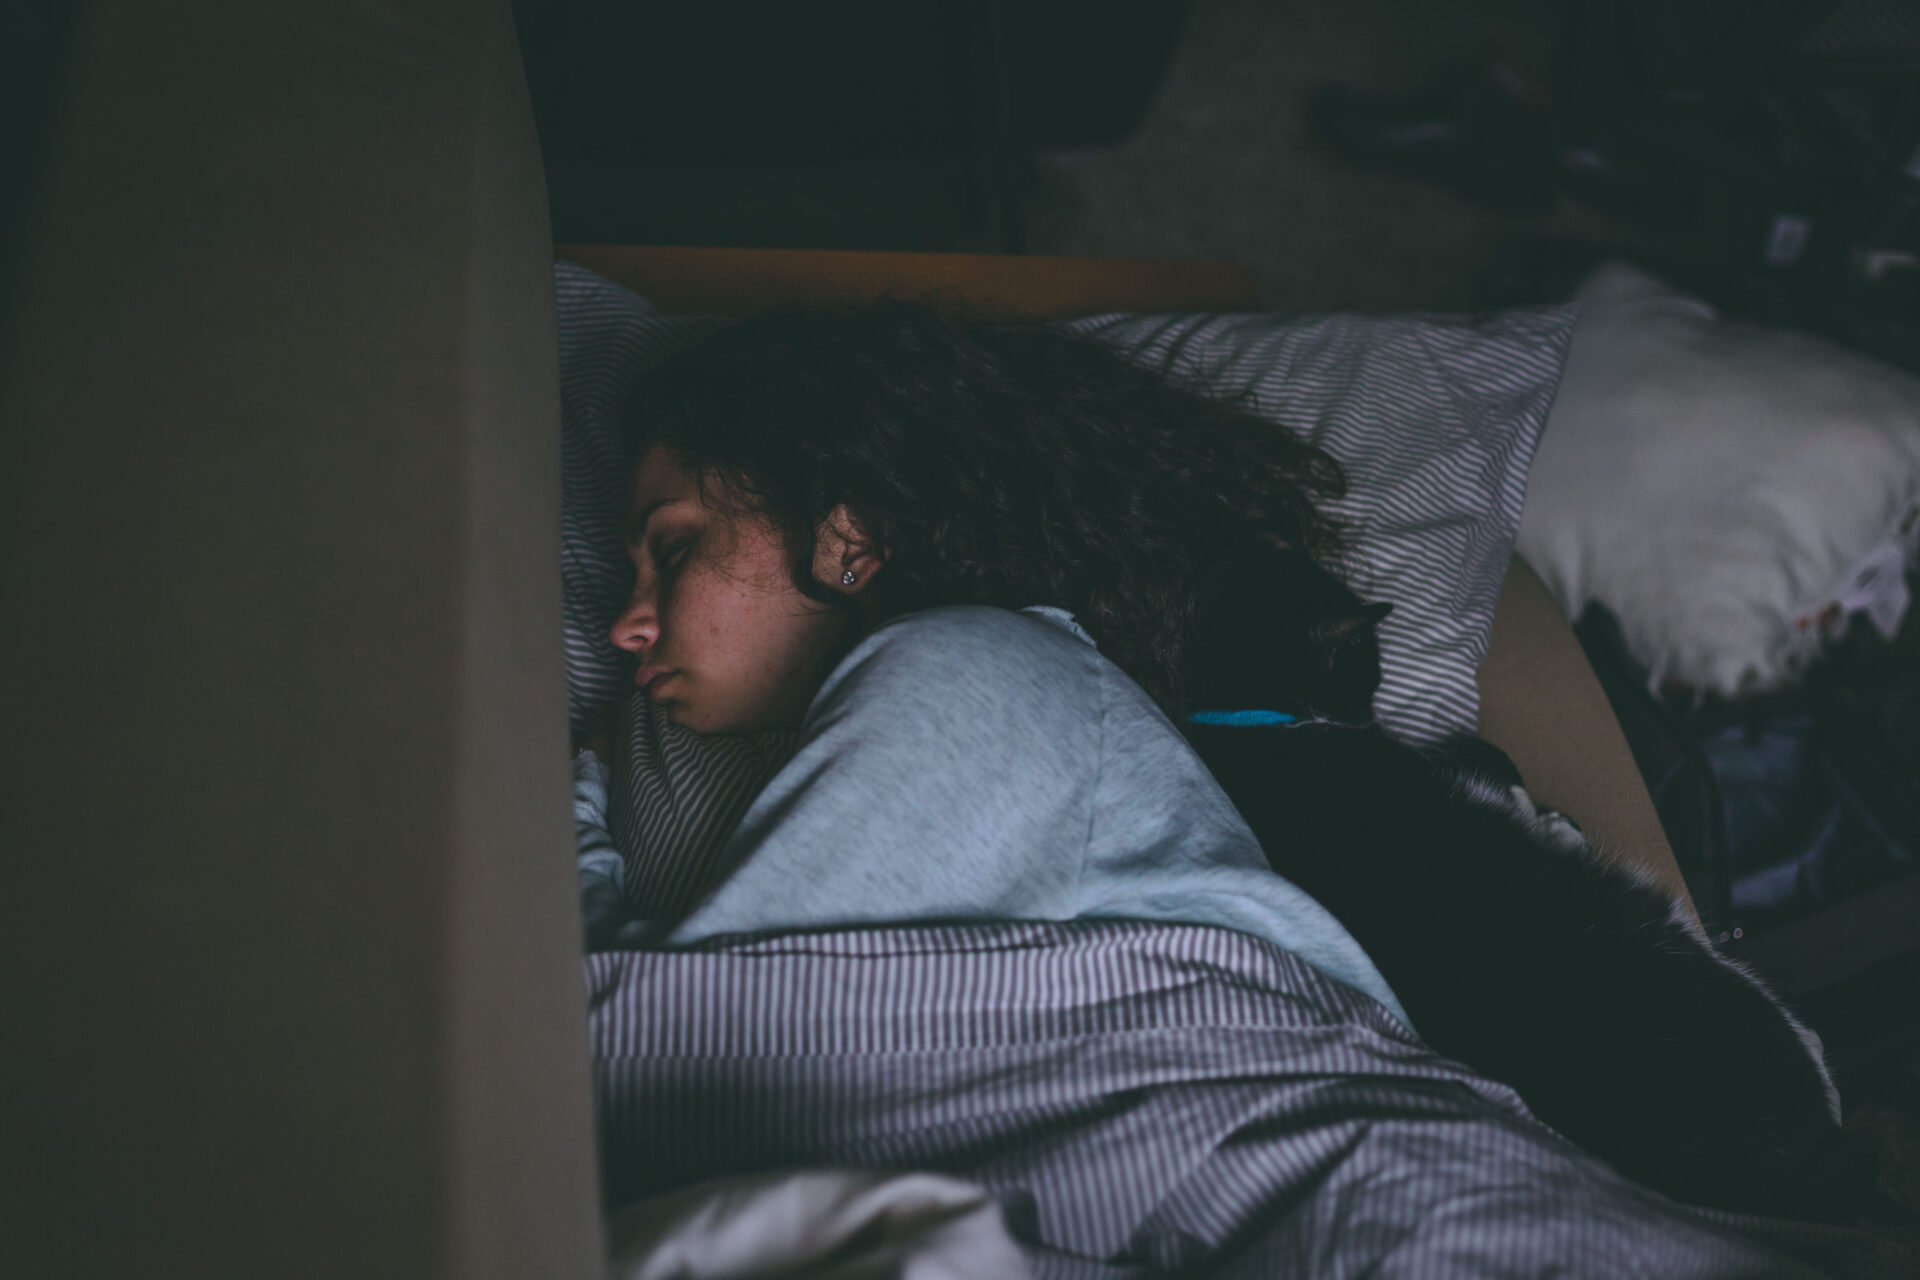 A Rutgers expert discusses how to maintain healthy sleep habits during the public health crisis